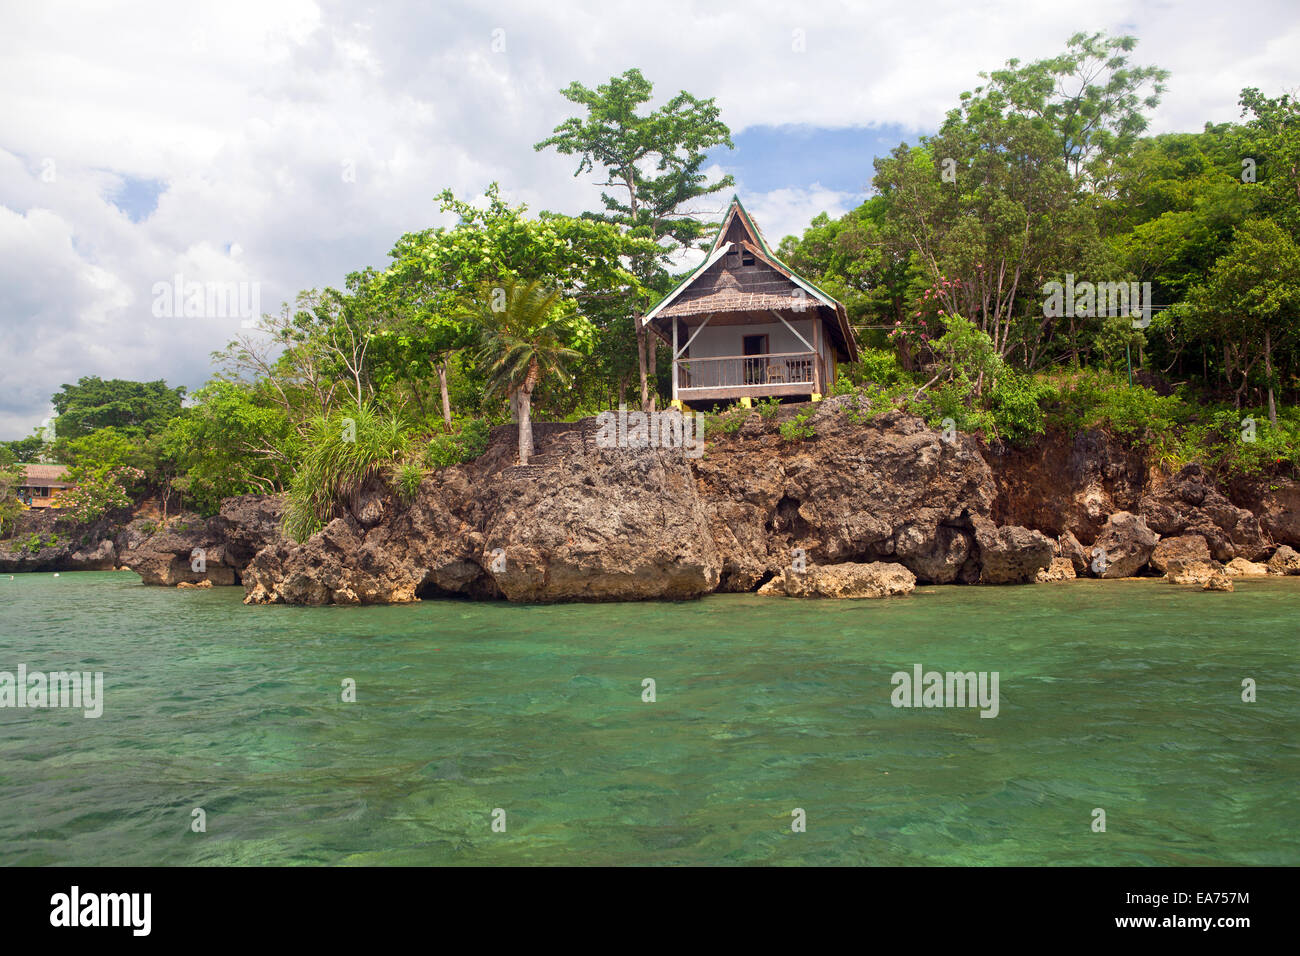 Guimaras Islands, Philippines - A rustic cottage perched on top of a limestone coral reef overlooks the Panay Gulf. Stock Photo